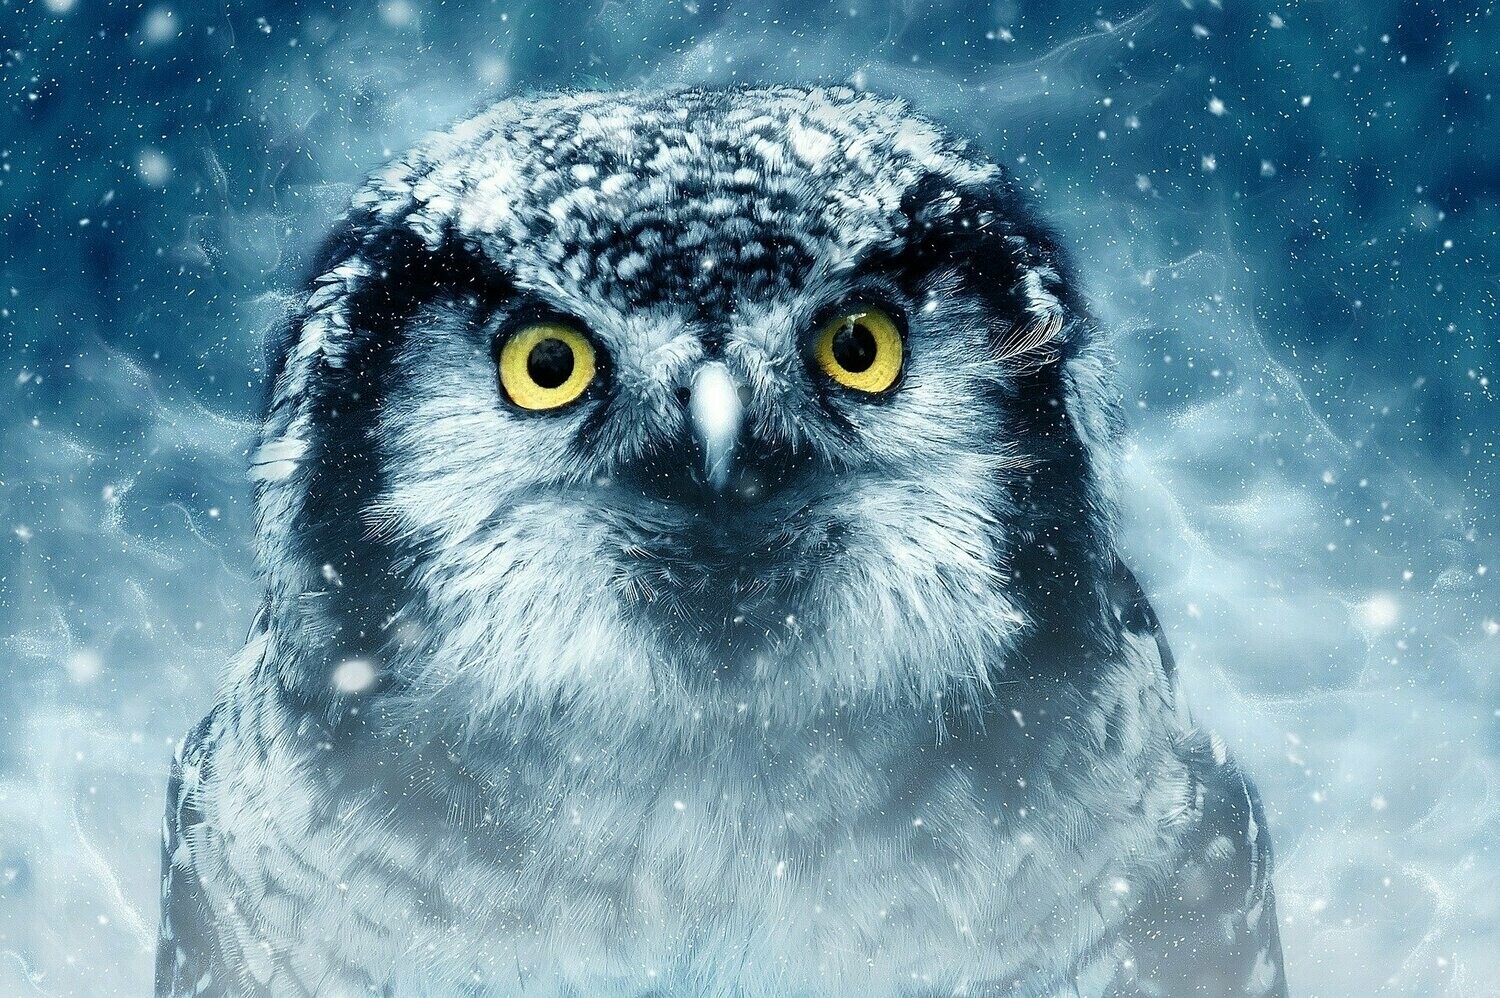 Owl in Snow - Specially ordered for you. Delivery is approximately 4 - 6 weeks.